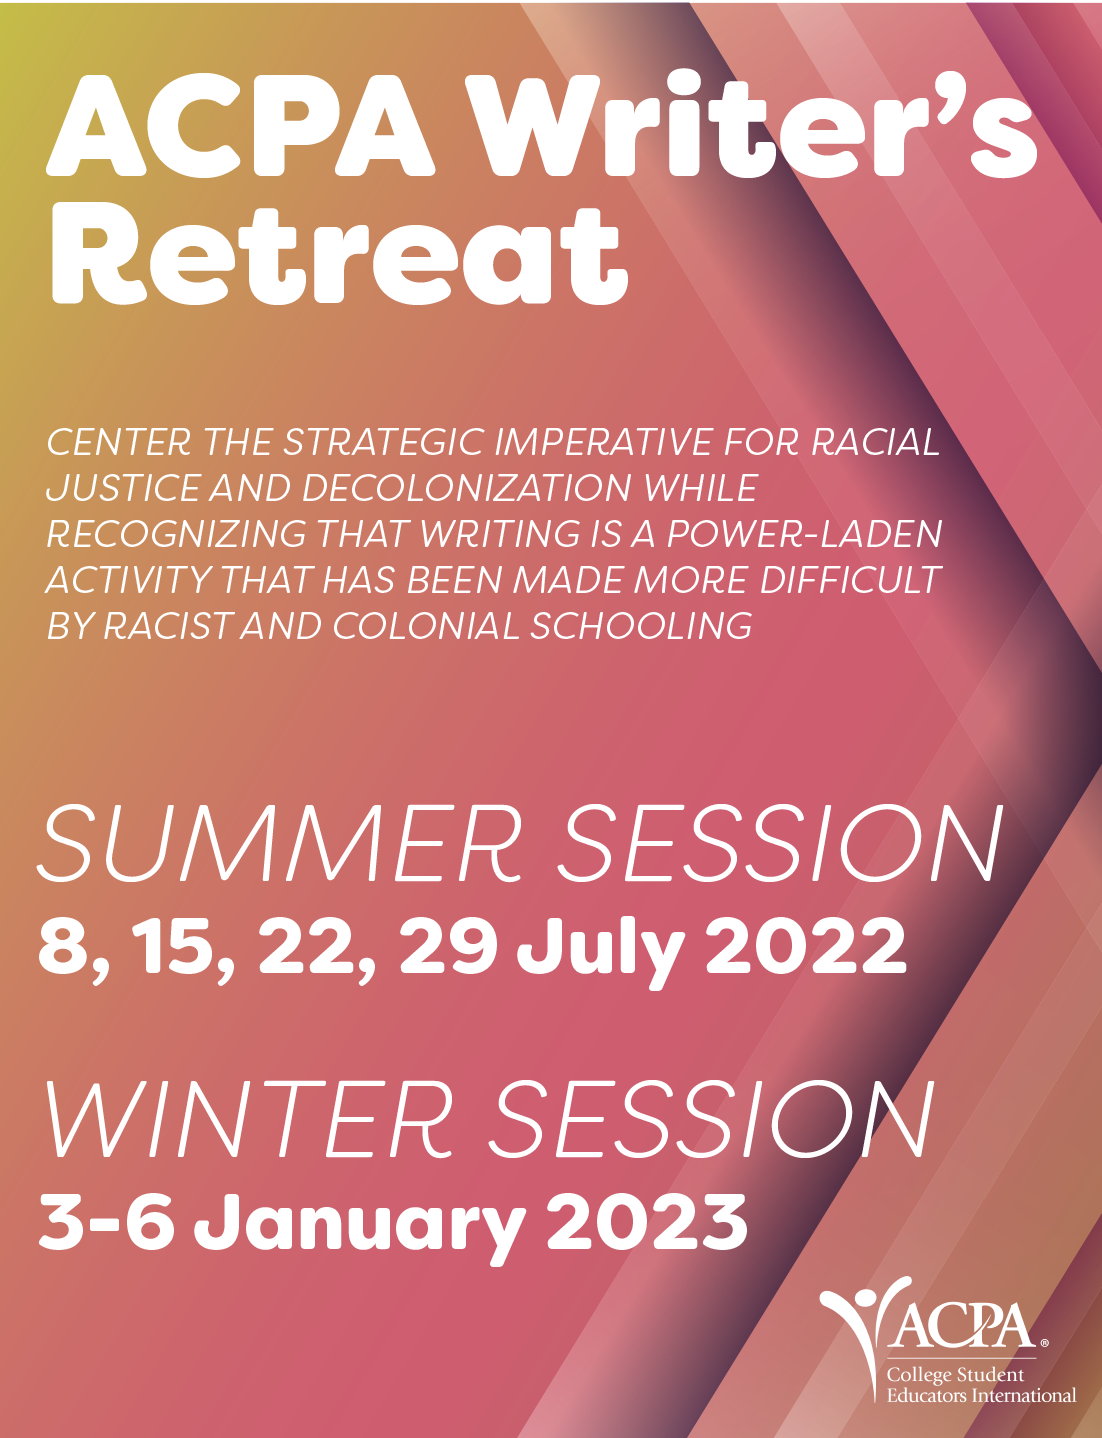 ACPA Writer's Retreat CENTER THE STRATEGIC IMPERATIVE FOR RACIAL JUSTICE AND DECOLONIZATION WHILE RECOGNIZING THAT WRITING IS A POWER-LADEN ACTIVITY THAT HAS BEEN MADE MORE DIFFICULT BY RACIST AND COLONIAL SCHOOLING.